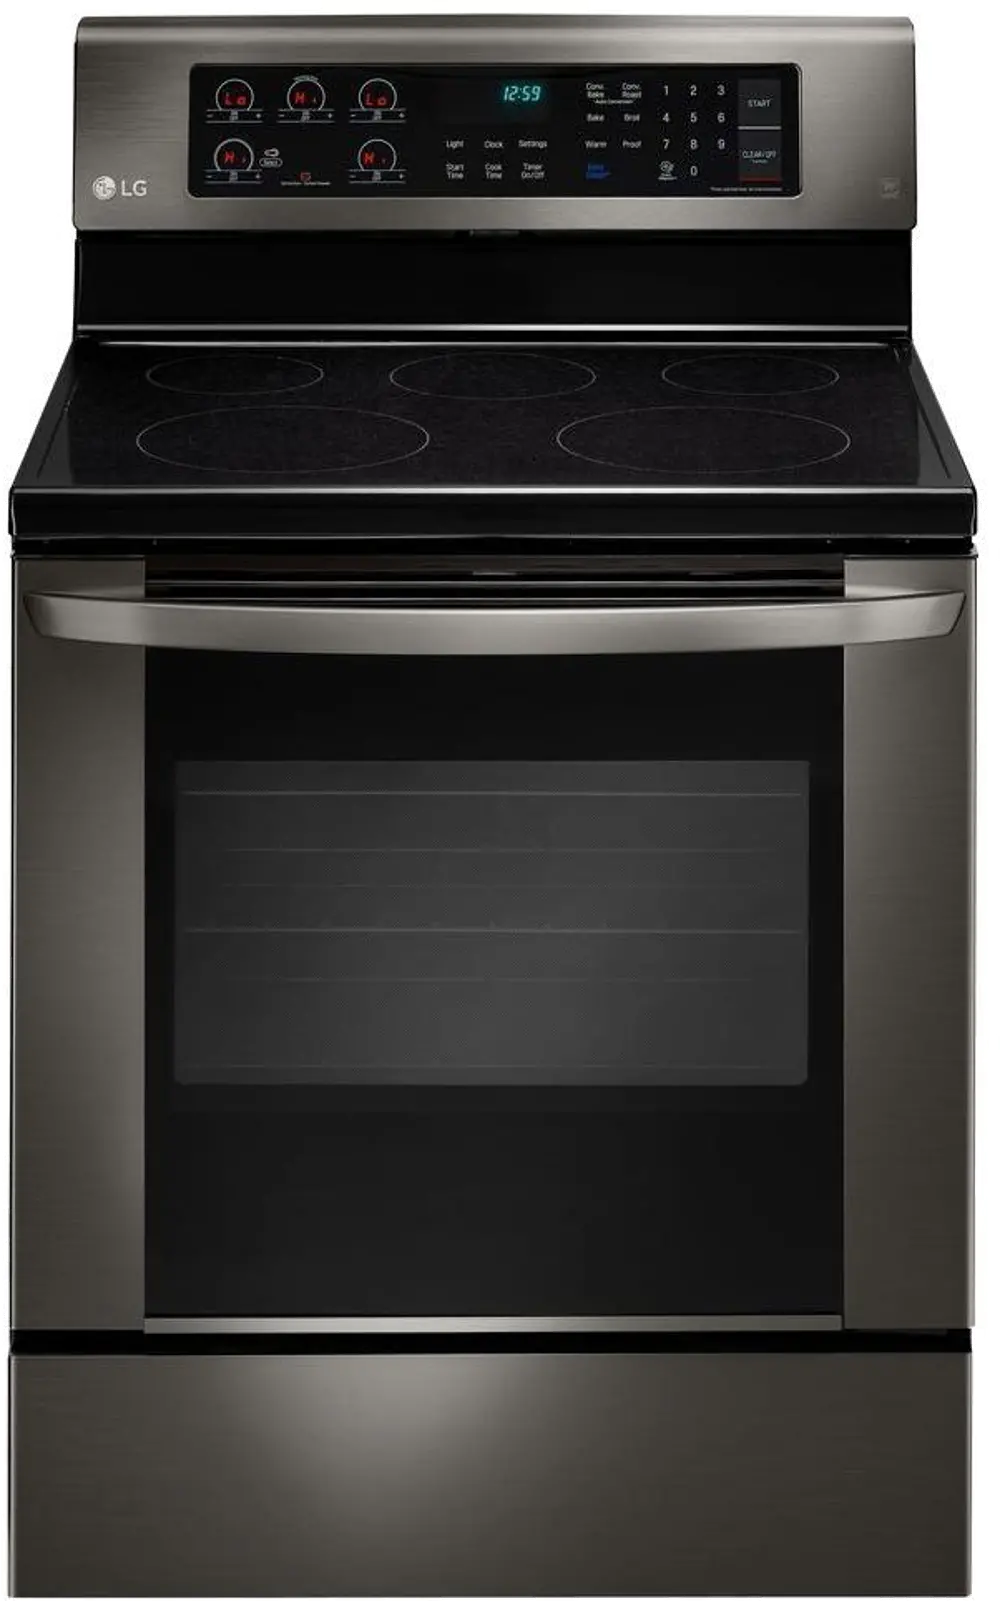 LRE3061BD LG 6.3 cu. ft. Electric Range with EasyClean - Black Stainless Steel -1